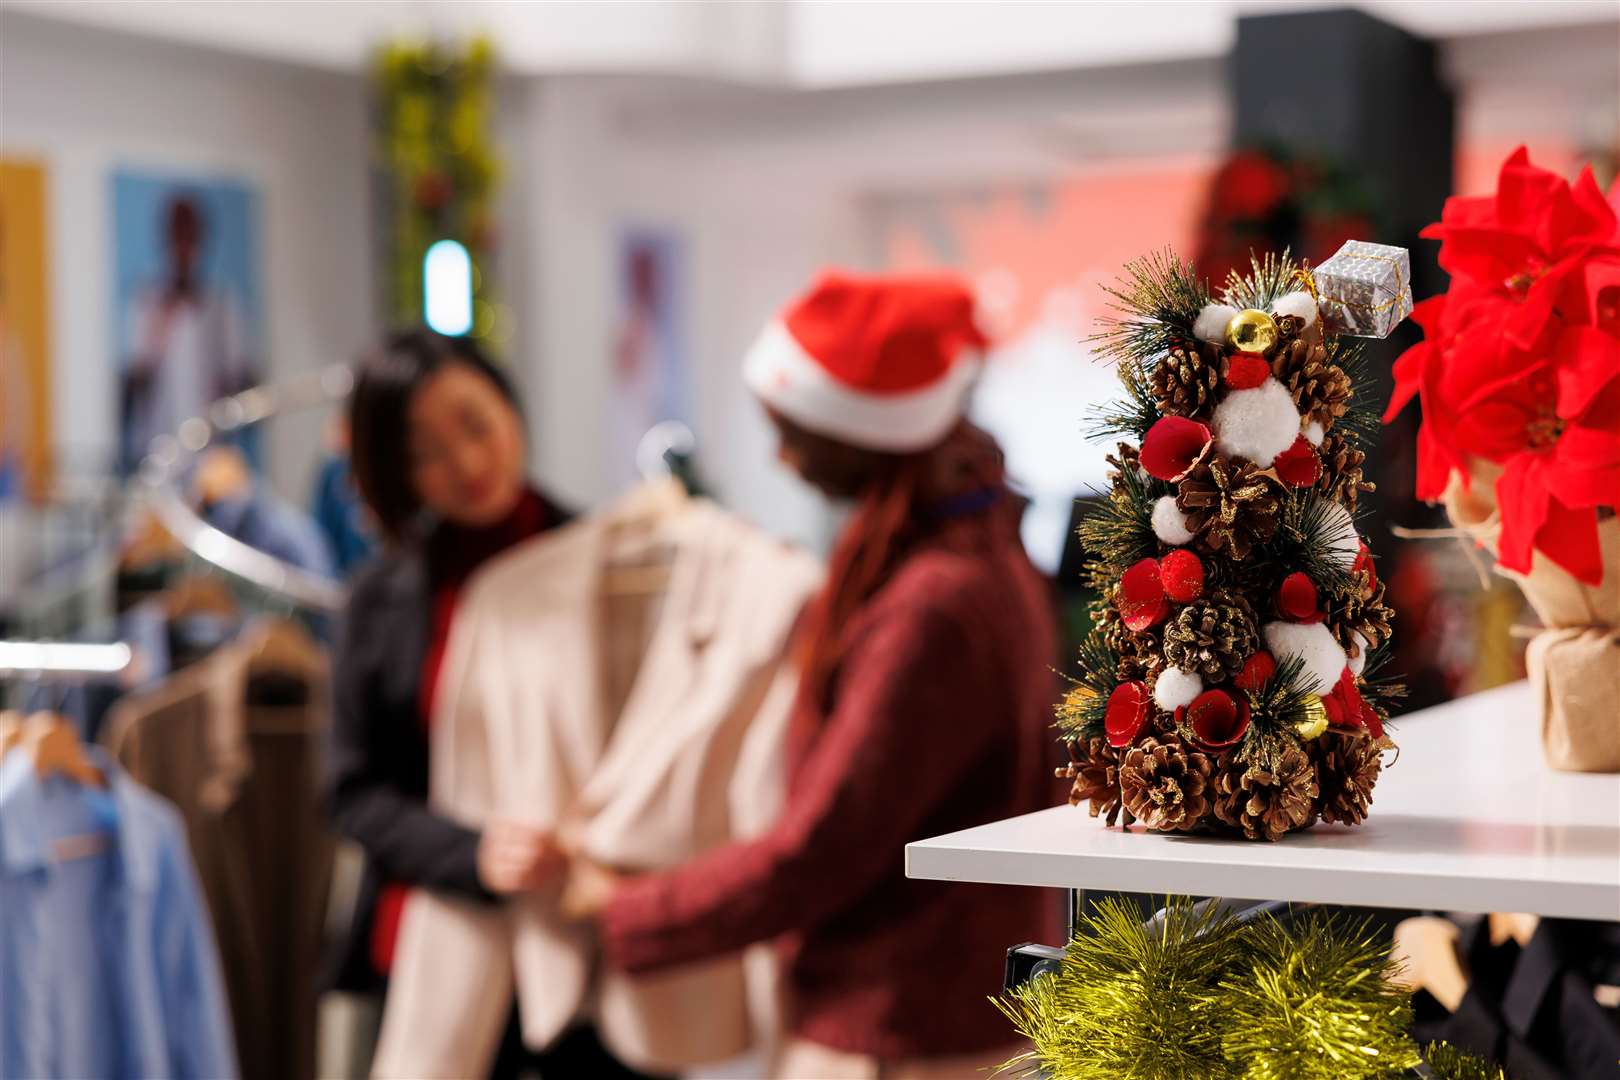 Shopper looking for last-minute gifts are being asked to respect retail workers.